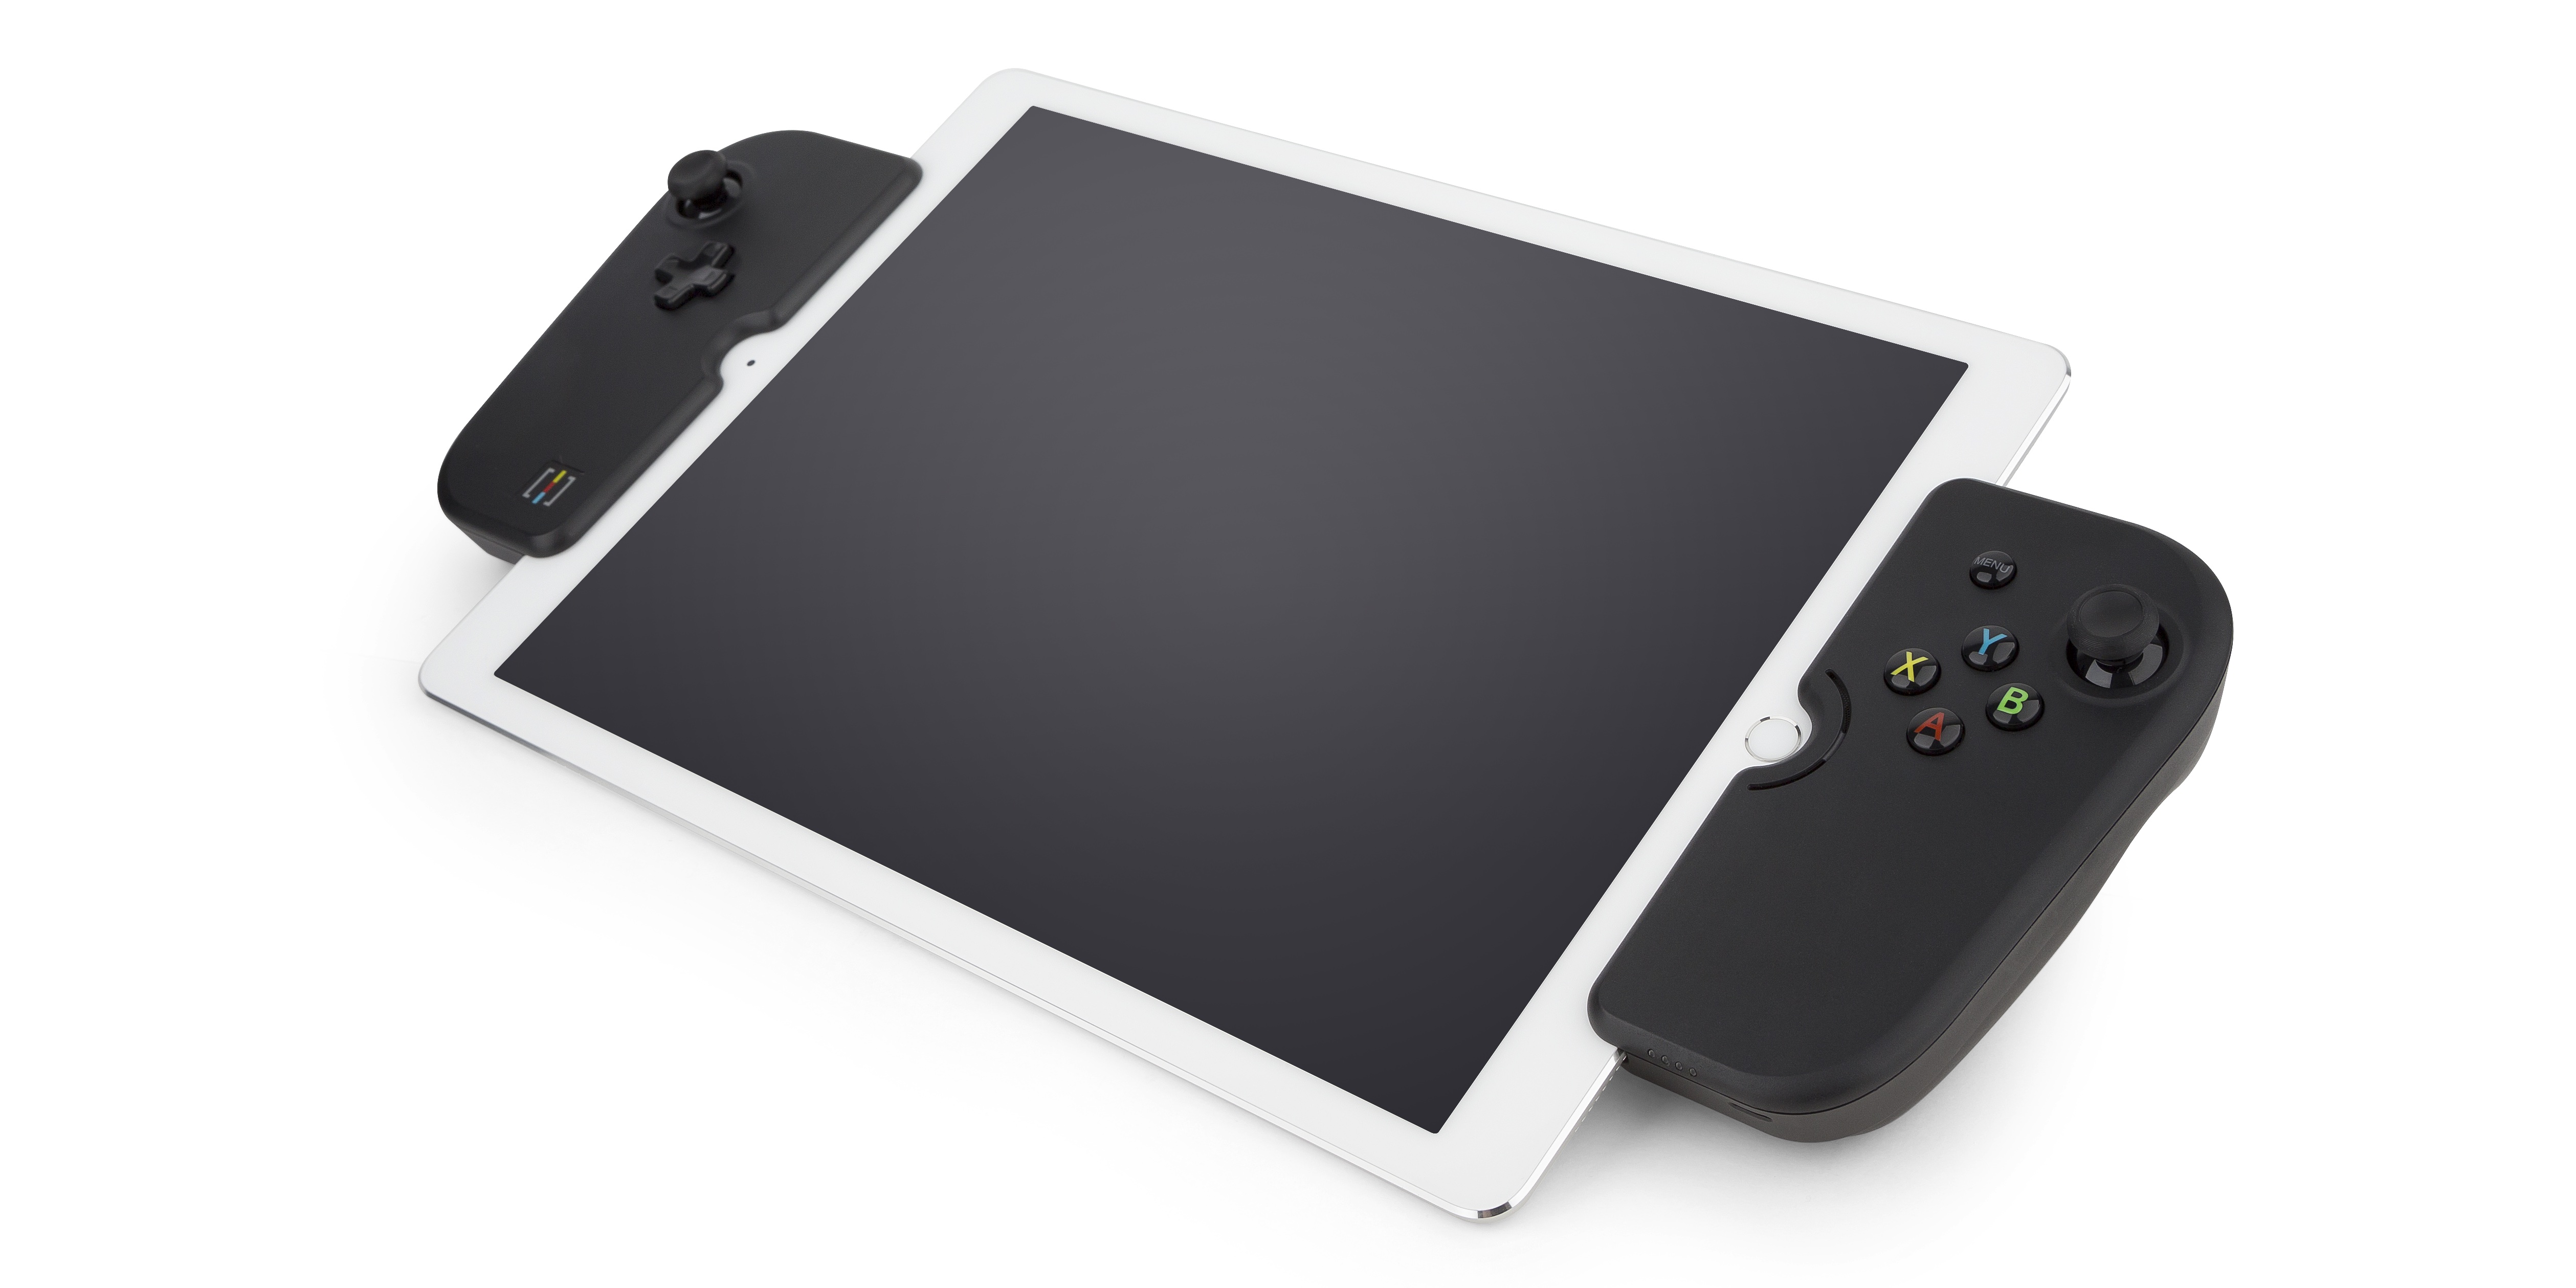 Review: Gamevice MFi controller transforms iPad iPhone into a handheld game console 9to5Mac